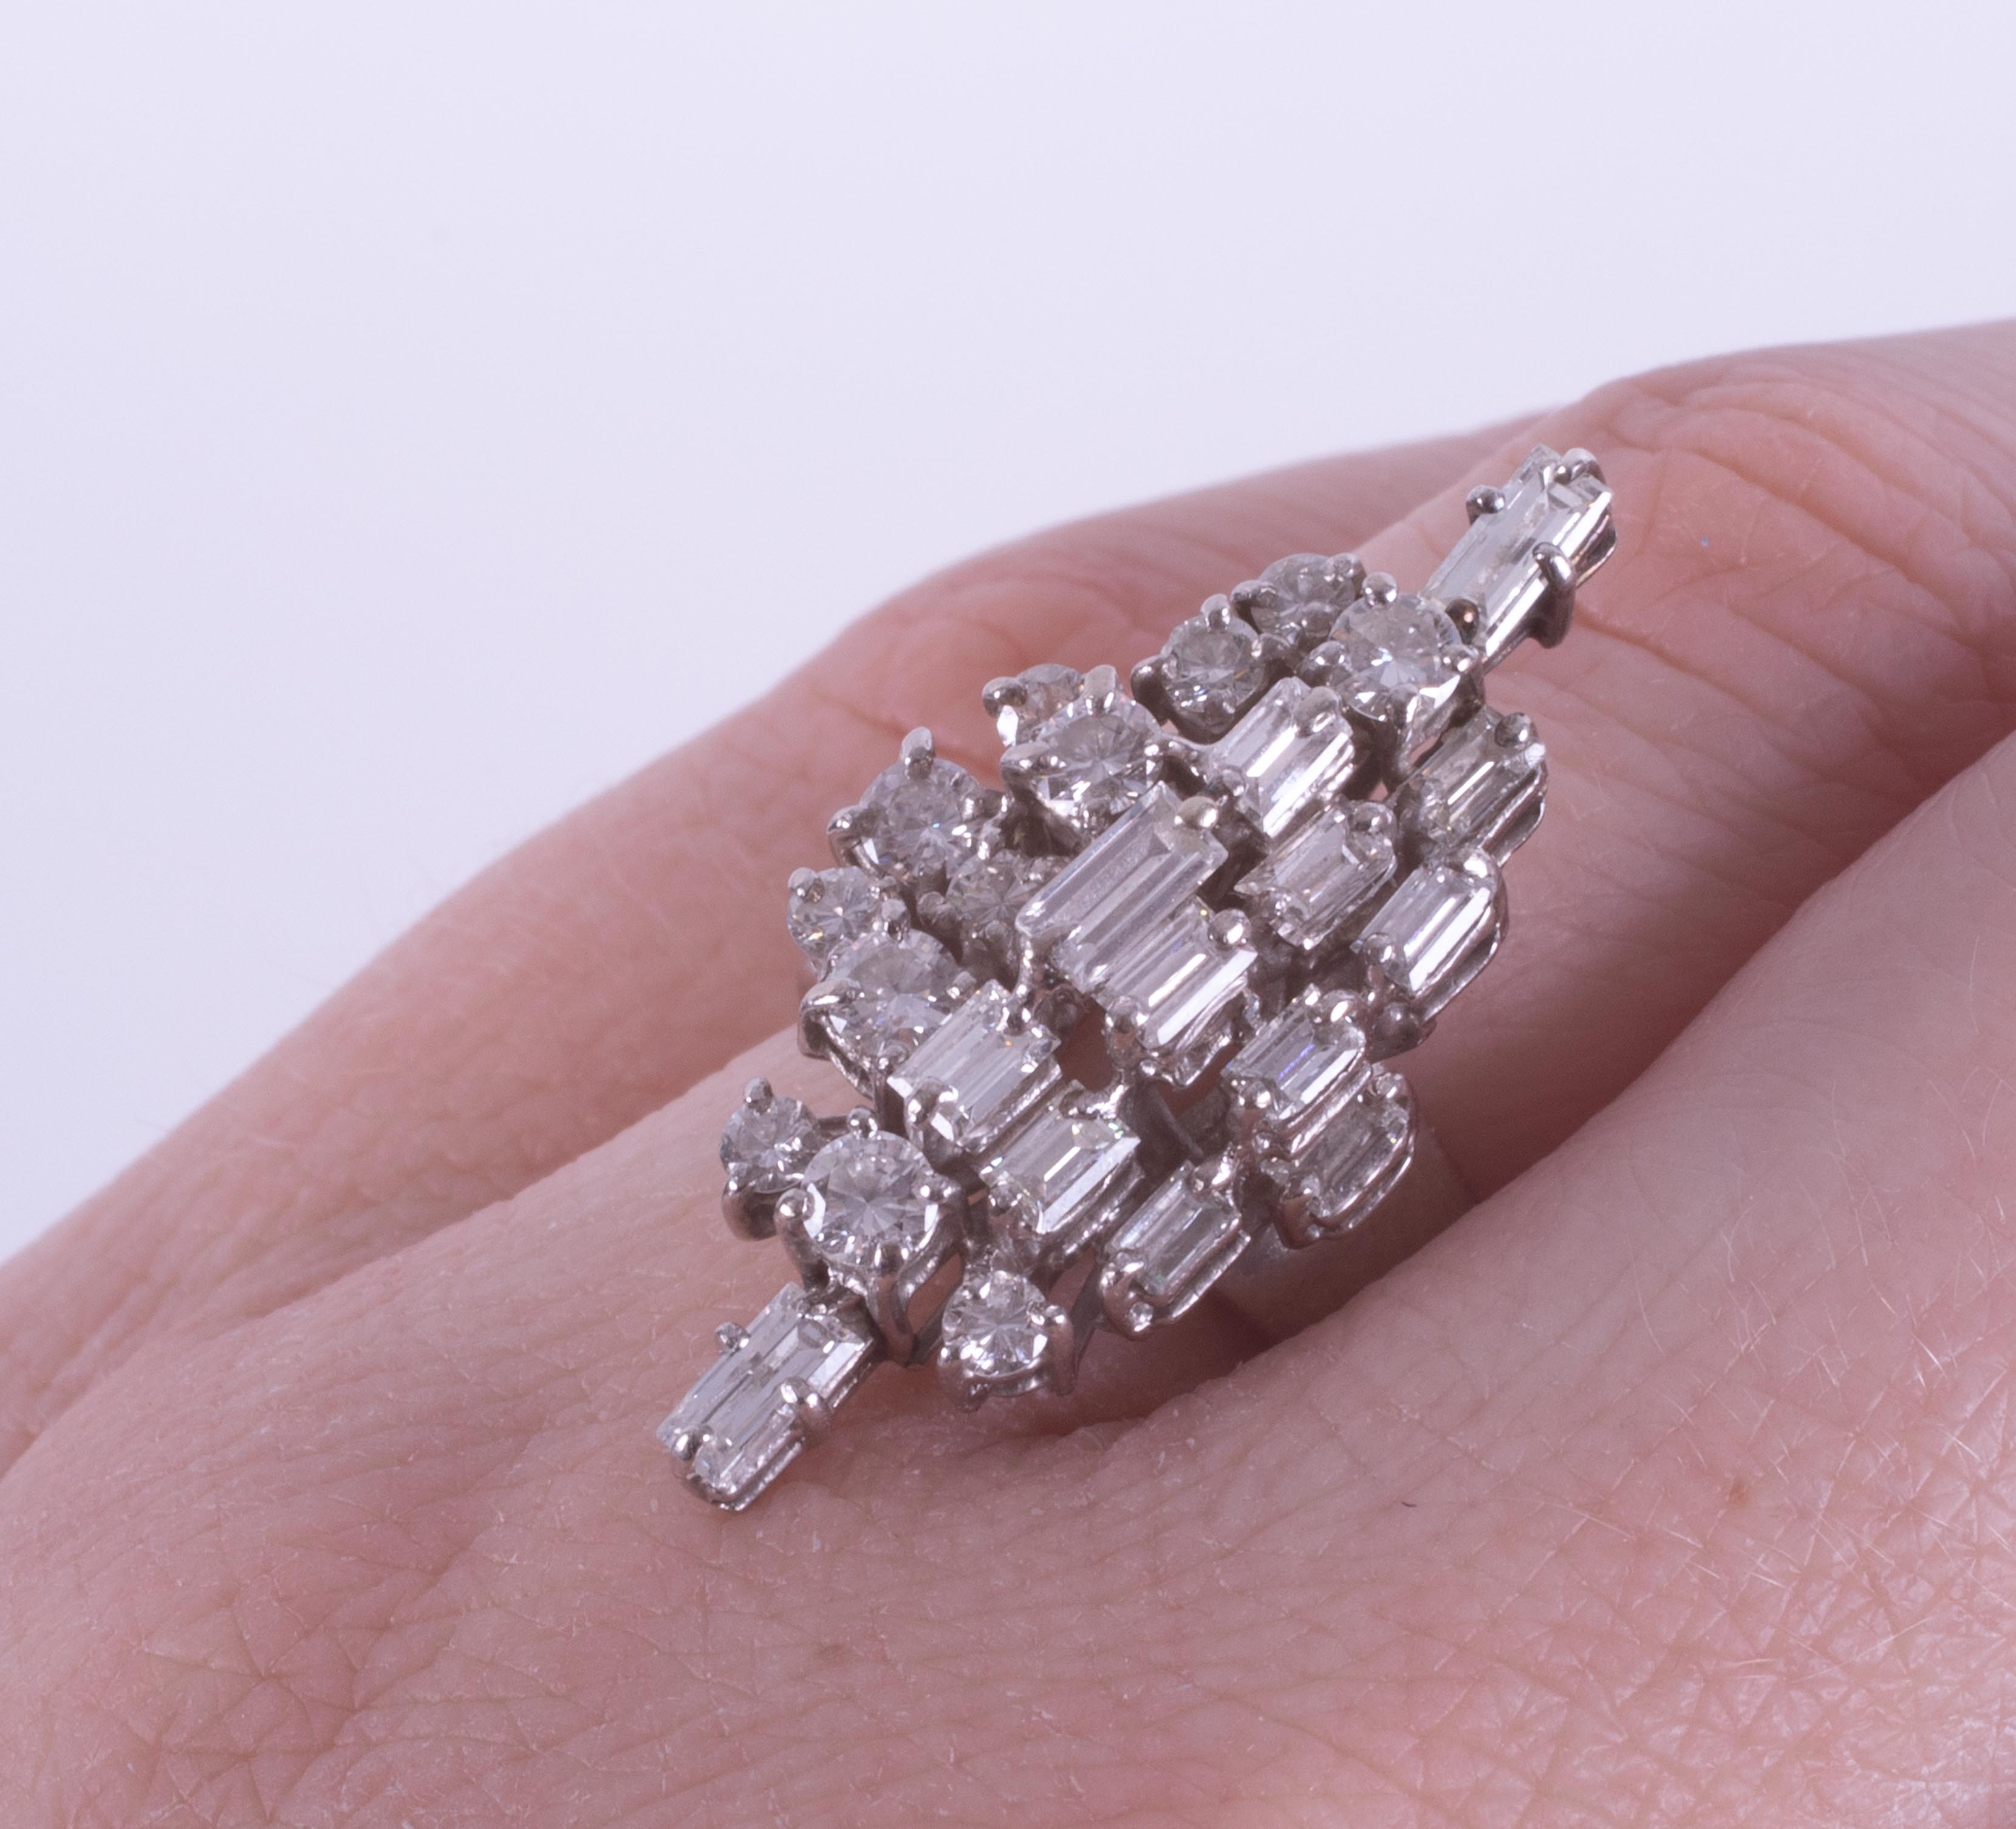 An 18ct white gold ring set with a mixture of baguette cuts and round brilliant cut diamonds in a - Image 2 of 2